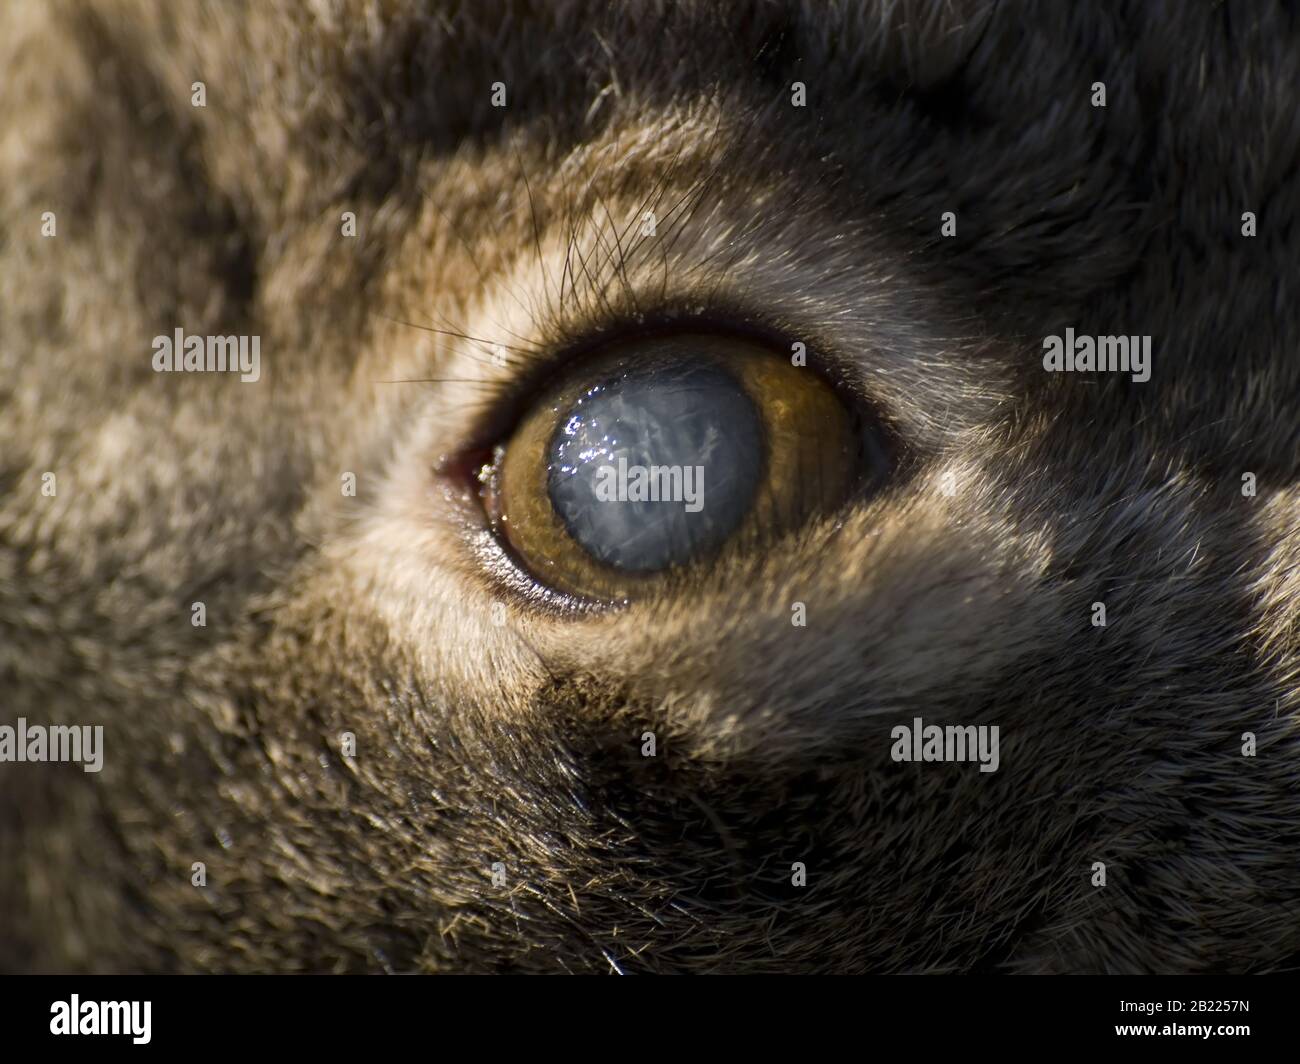 A macro photo of the clouded eye of a dead rabbit in the Arizona desert. The rabbit was undamaged, which means it may have died from a disease since m Stock Photo